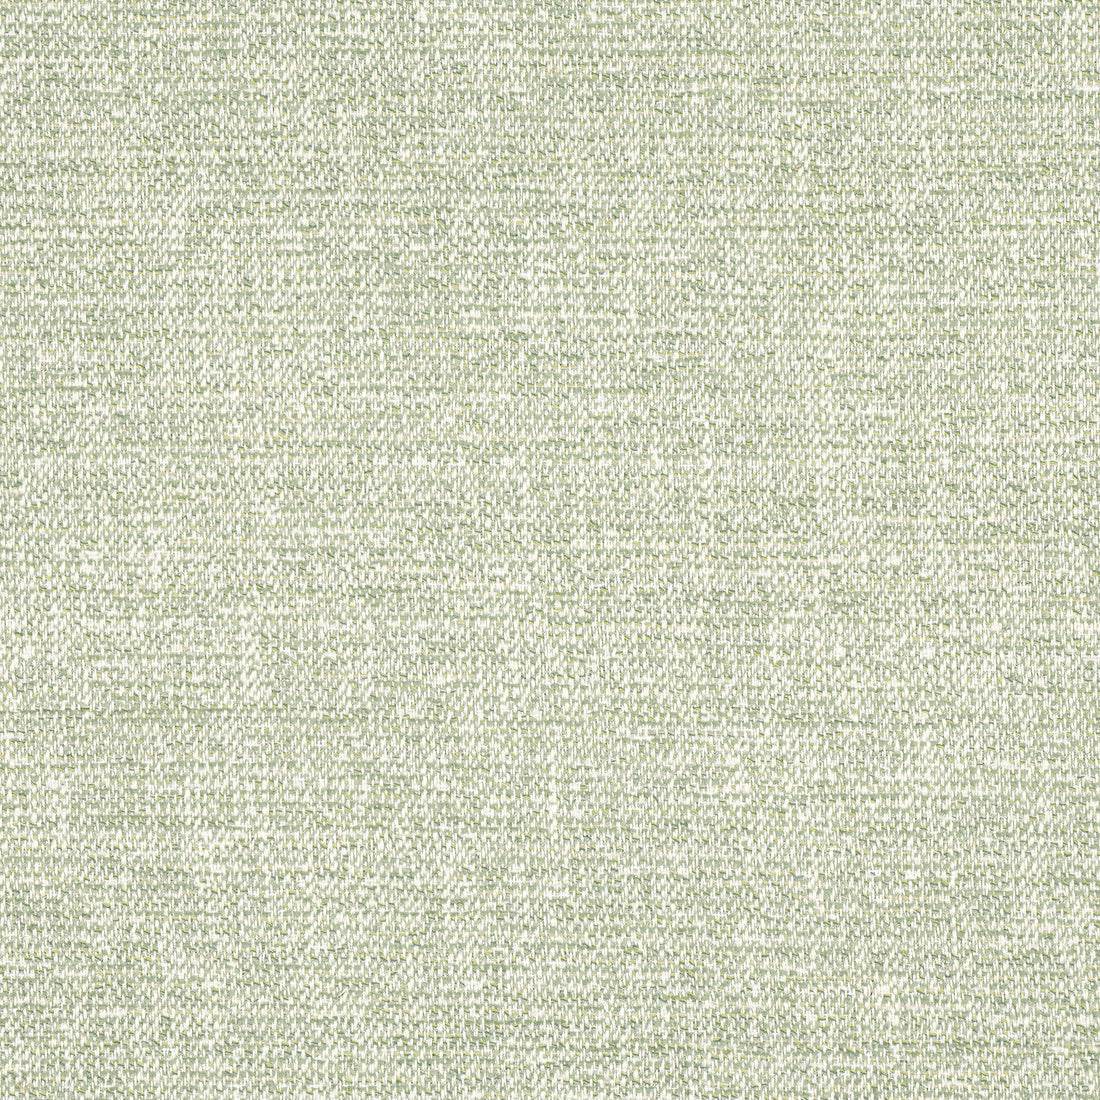 Calais fabric in aloe color - pattern number W8800 - by Thibaut in the Haven Textures collection